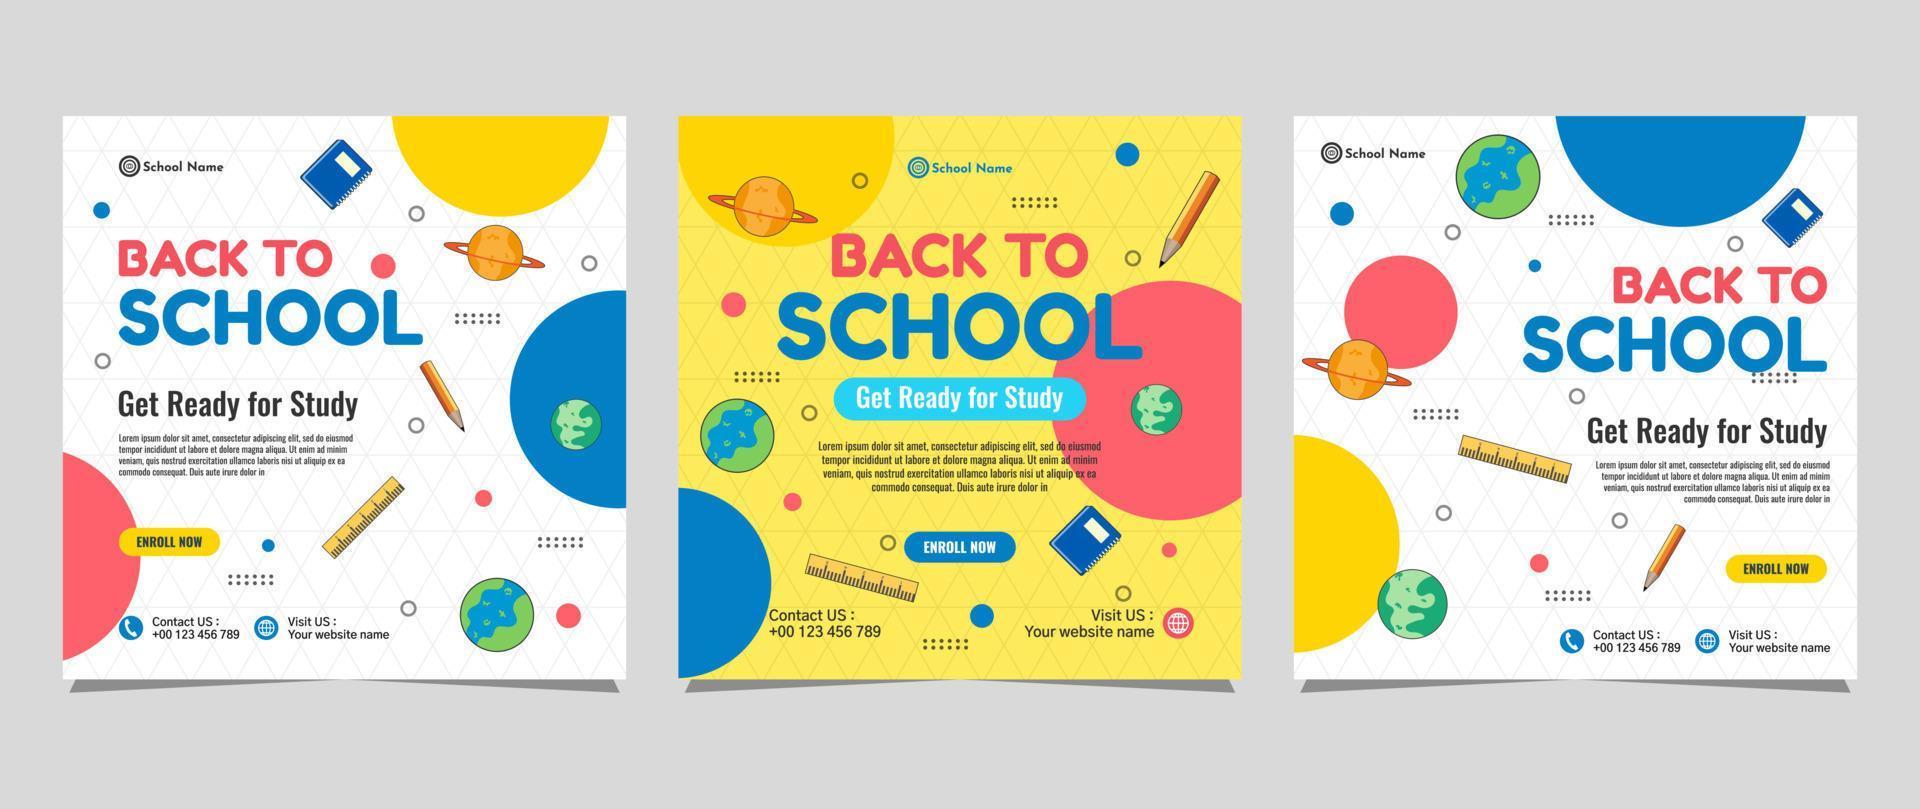 Back to school social media post template design. For web ads, postcard, card, business messages, discount flyers and big sale banners vector